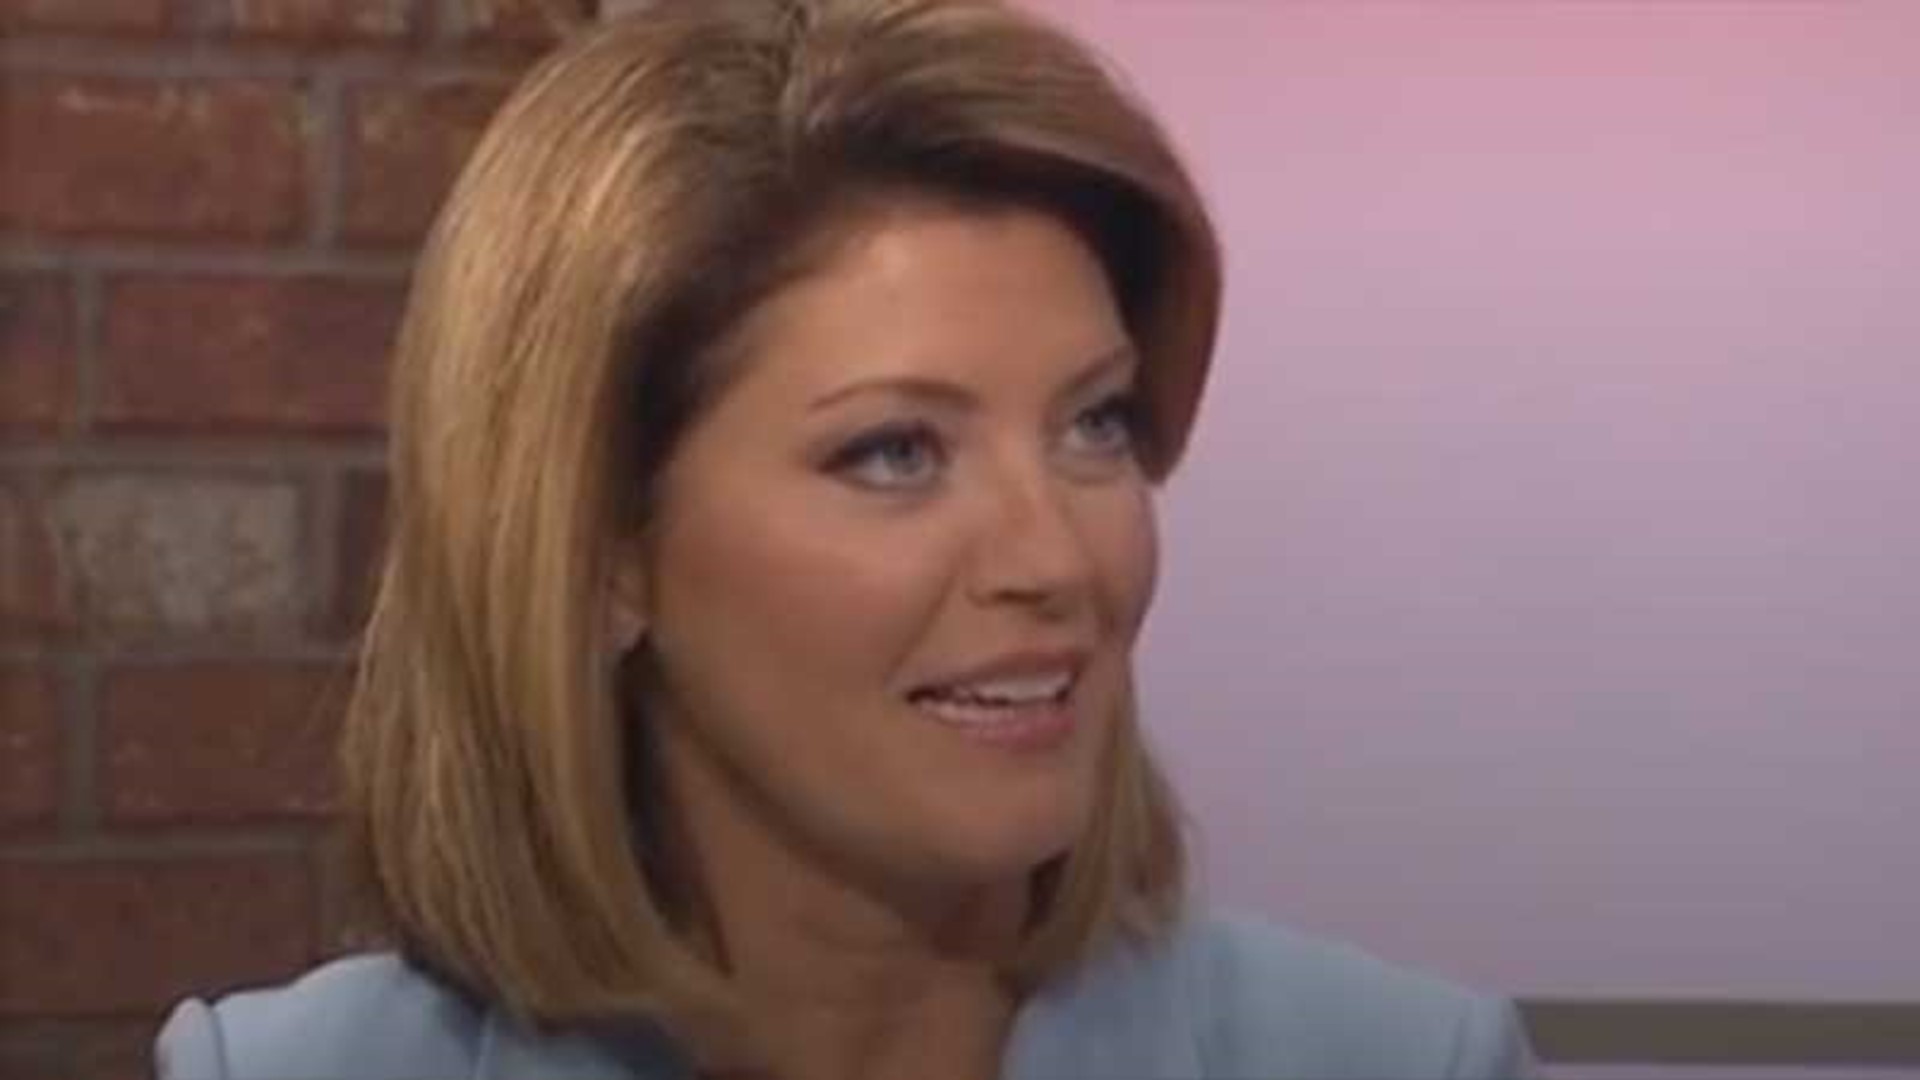 The newest "CBS Evening News" anchor and San Antonio native Norah O'Donnell discusses taking on the anchor desk with KENS 5's Deborah Knapp.